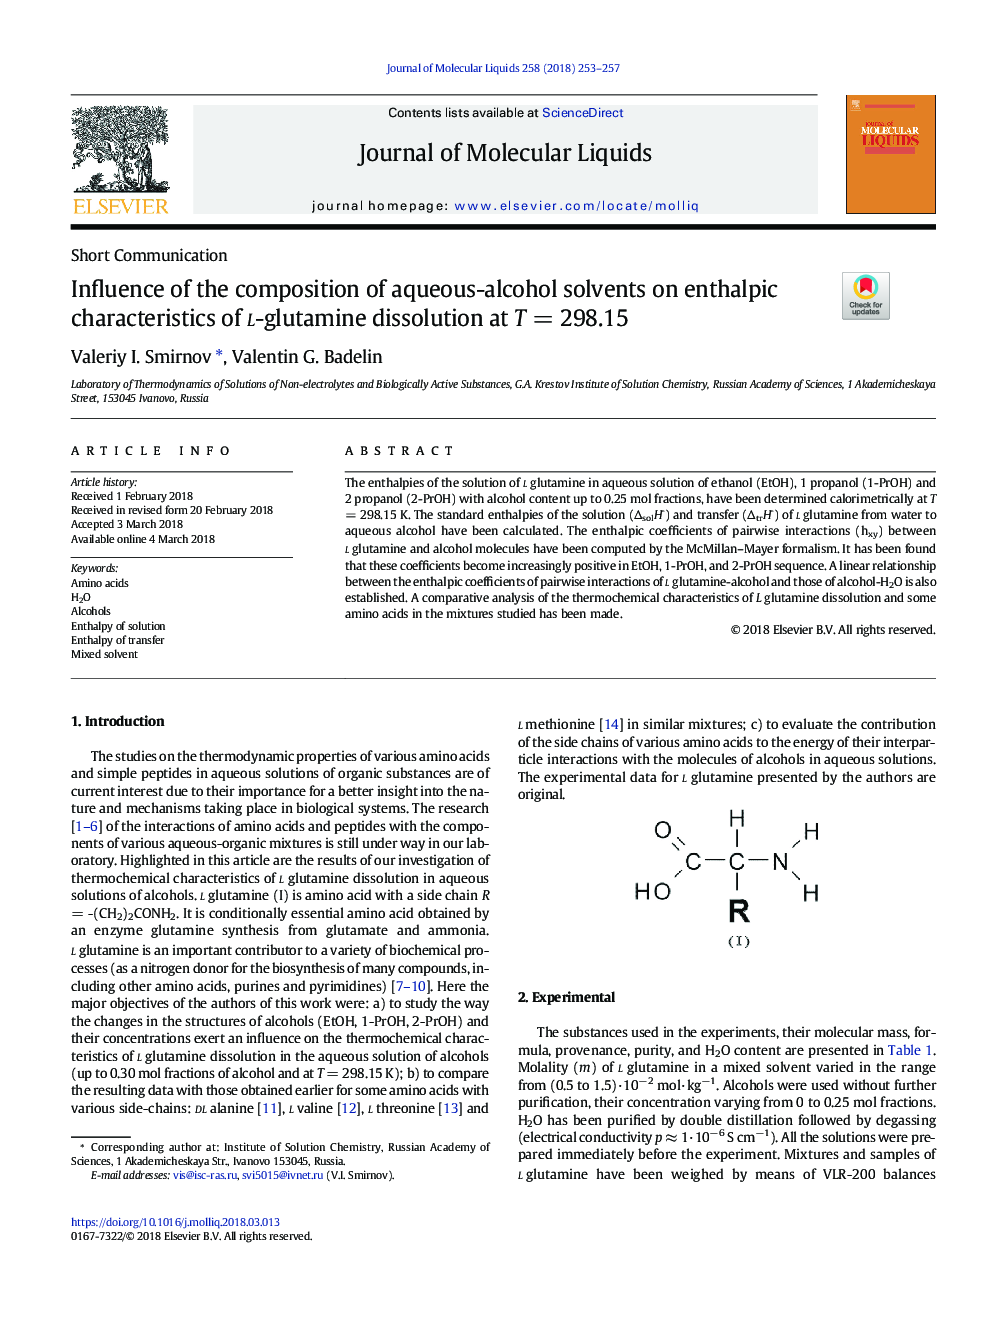 Influence of the composition of aqueous-alcohol solvents on enthalpic characteristics of l-glutamine dissolution at TÂ =Â 298.15